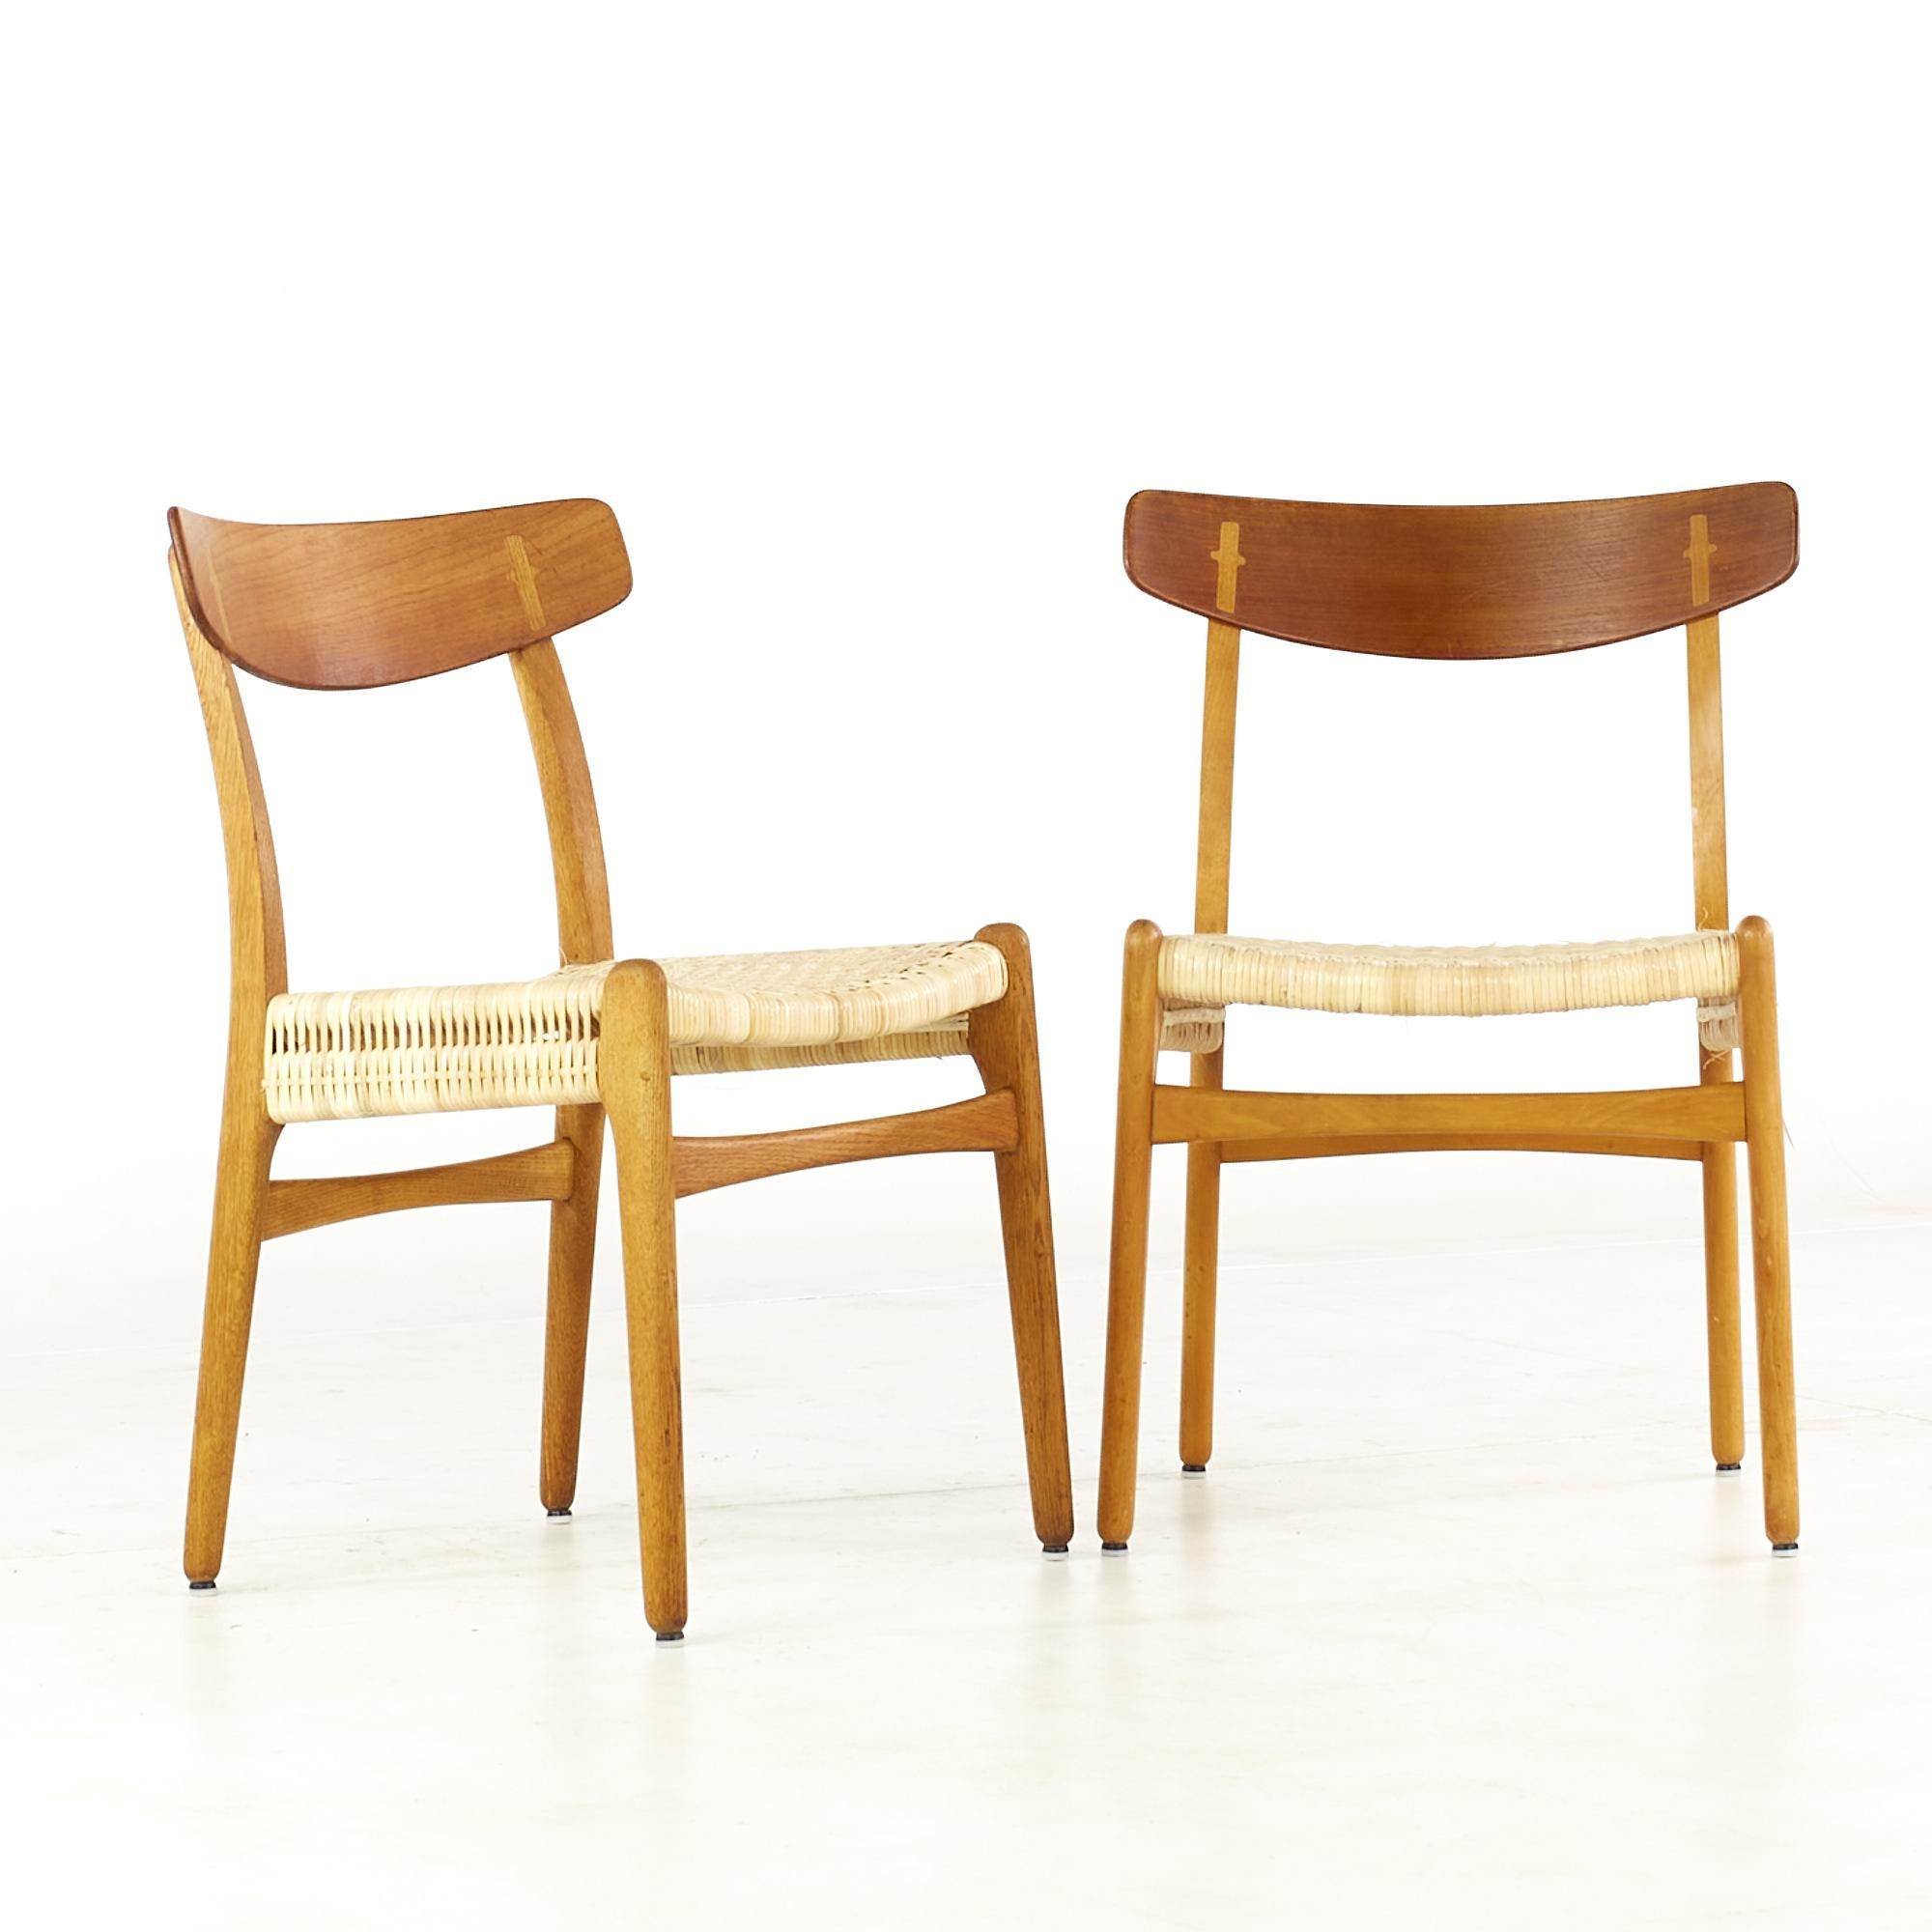 Hans Wegner for Carl Hansen and Son midcentury Teak CH23 Dining Chairs - Pair

These chairs Measure: 18.5 wide x 19.5 deep x 30.5 inches high, with a seat height/chair clearance of 18.25 inches

All pieces of furniture can be had in what we call